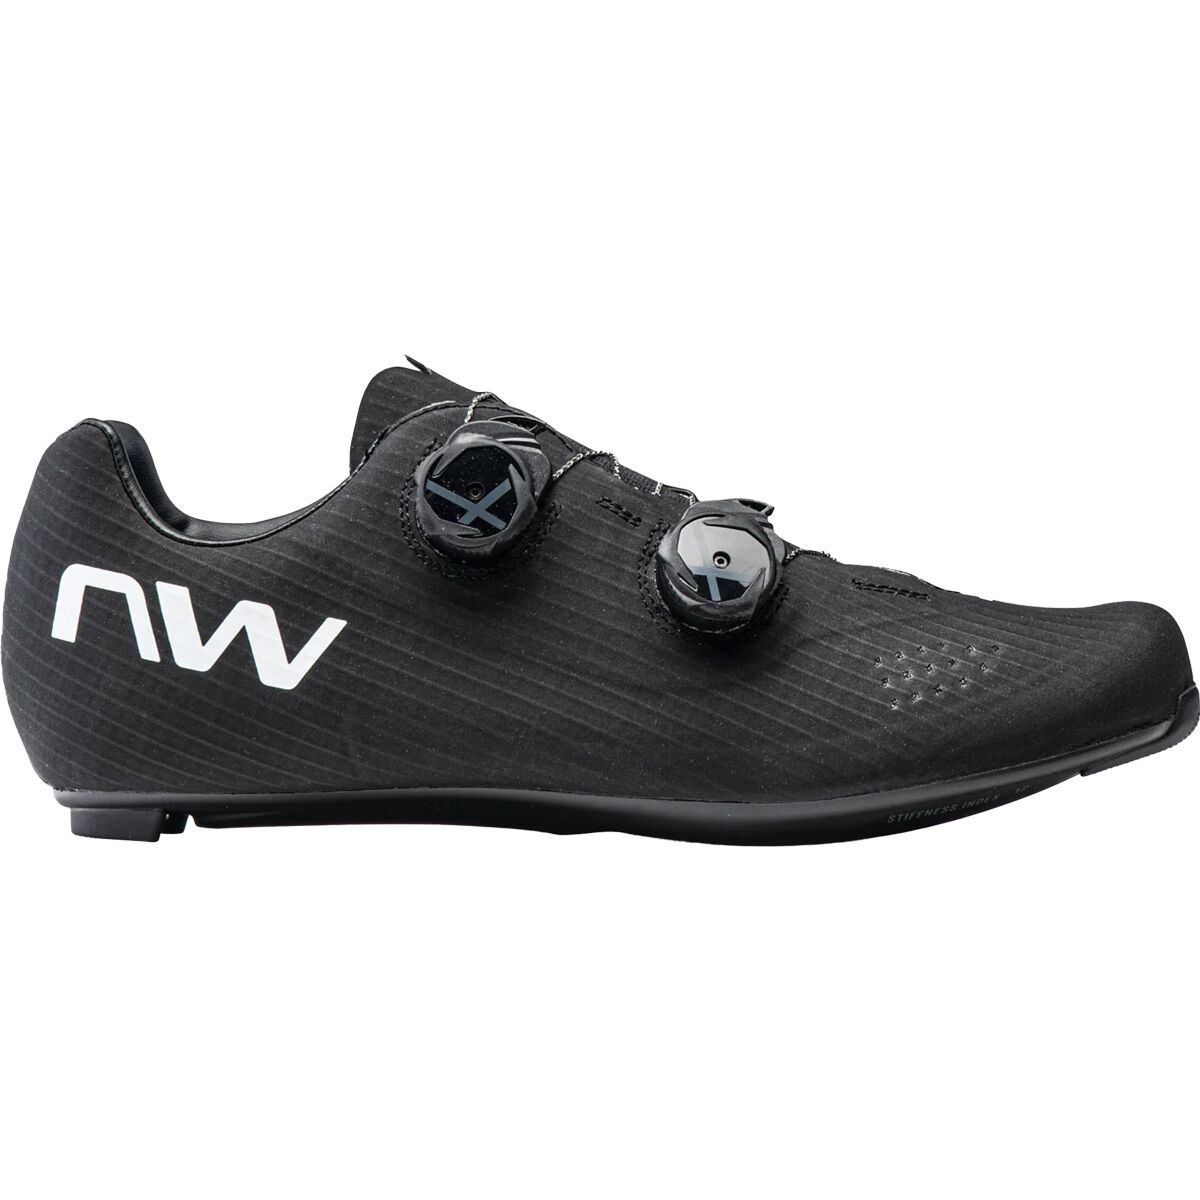 Northwave Extreme GT 4 Cycling Shoe - Men's